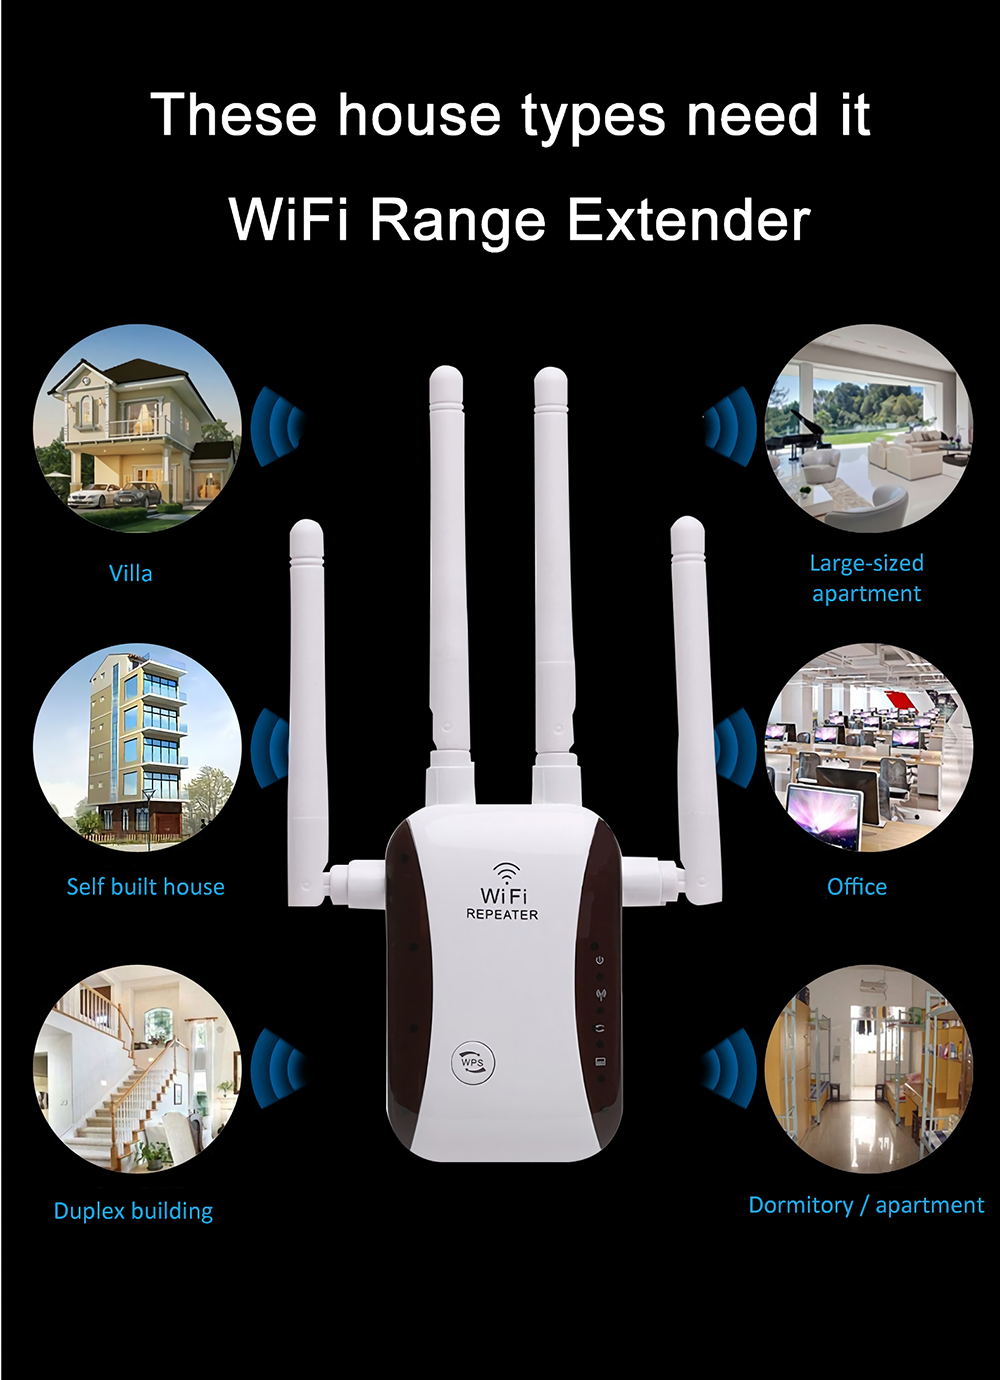 NBKEY-300Mbps-WiFi-Range-Extender-Wireless-Repeater-24-GHz-Support-Wireless-APRouter-Mode-with-Ether-1885234-1